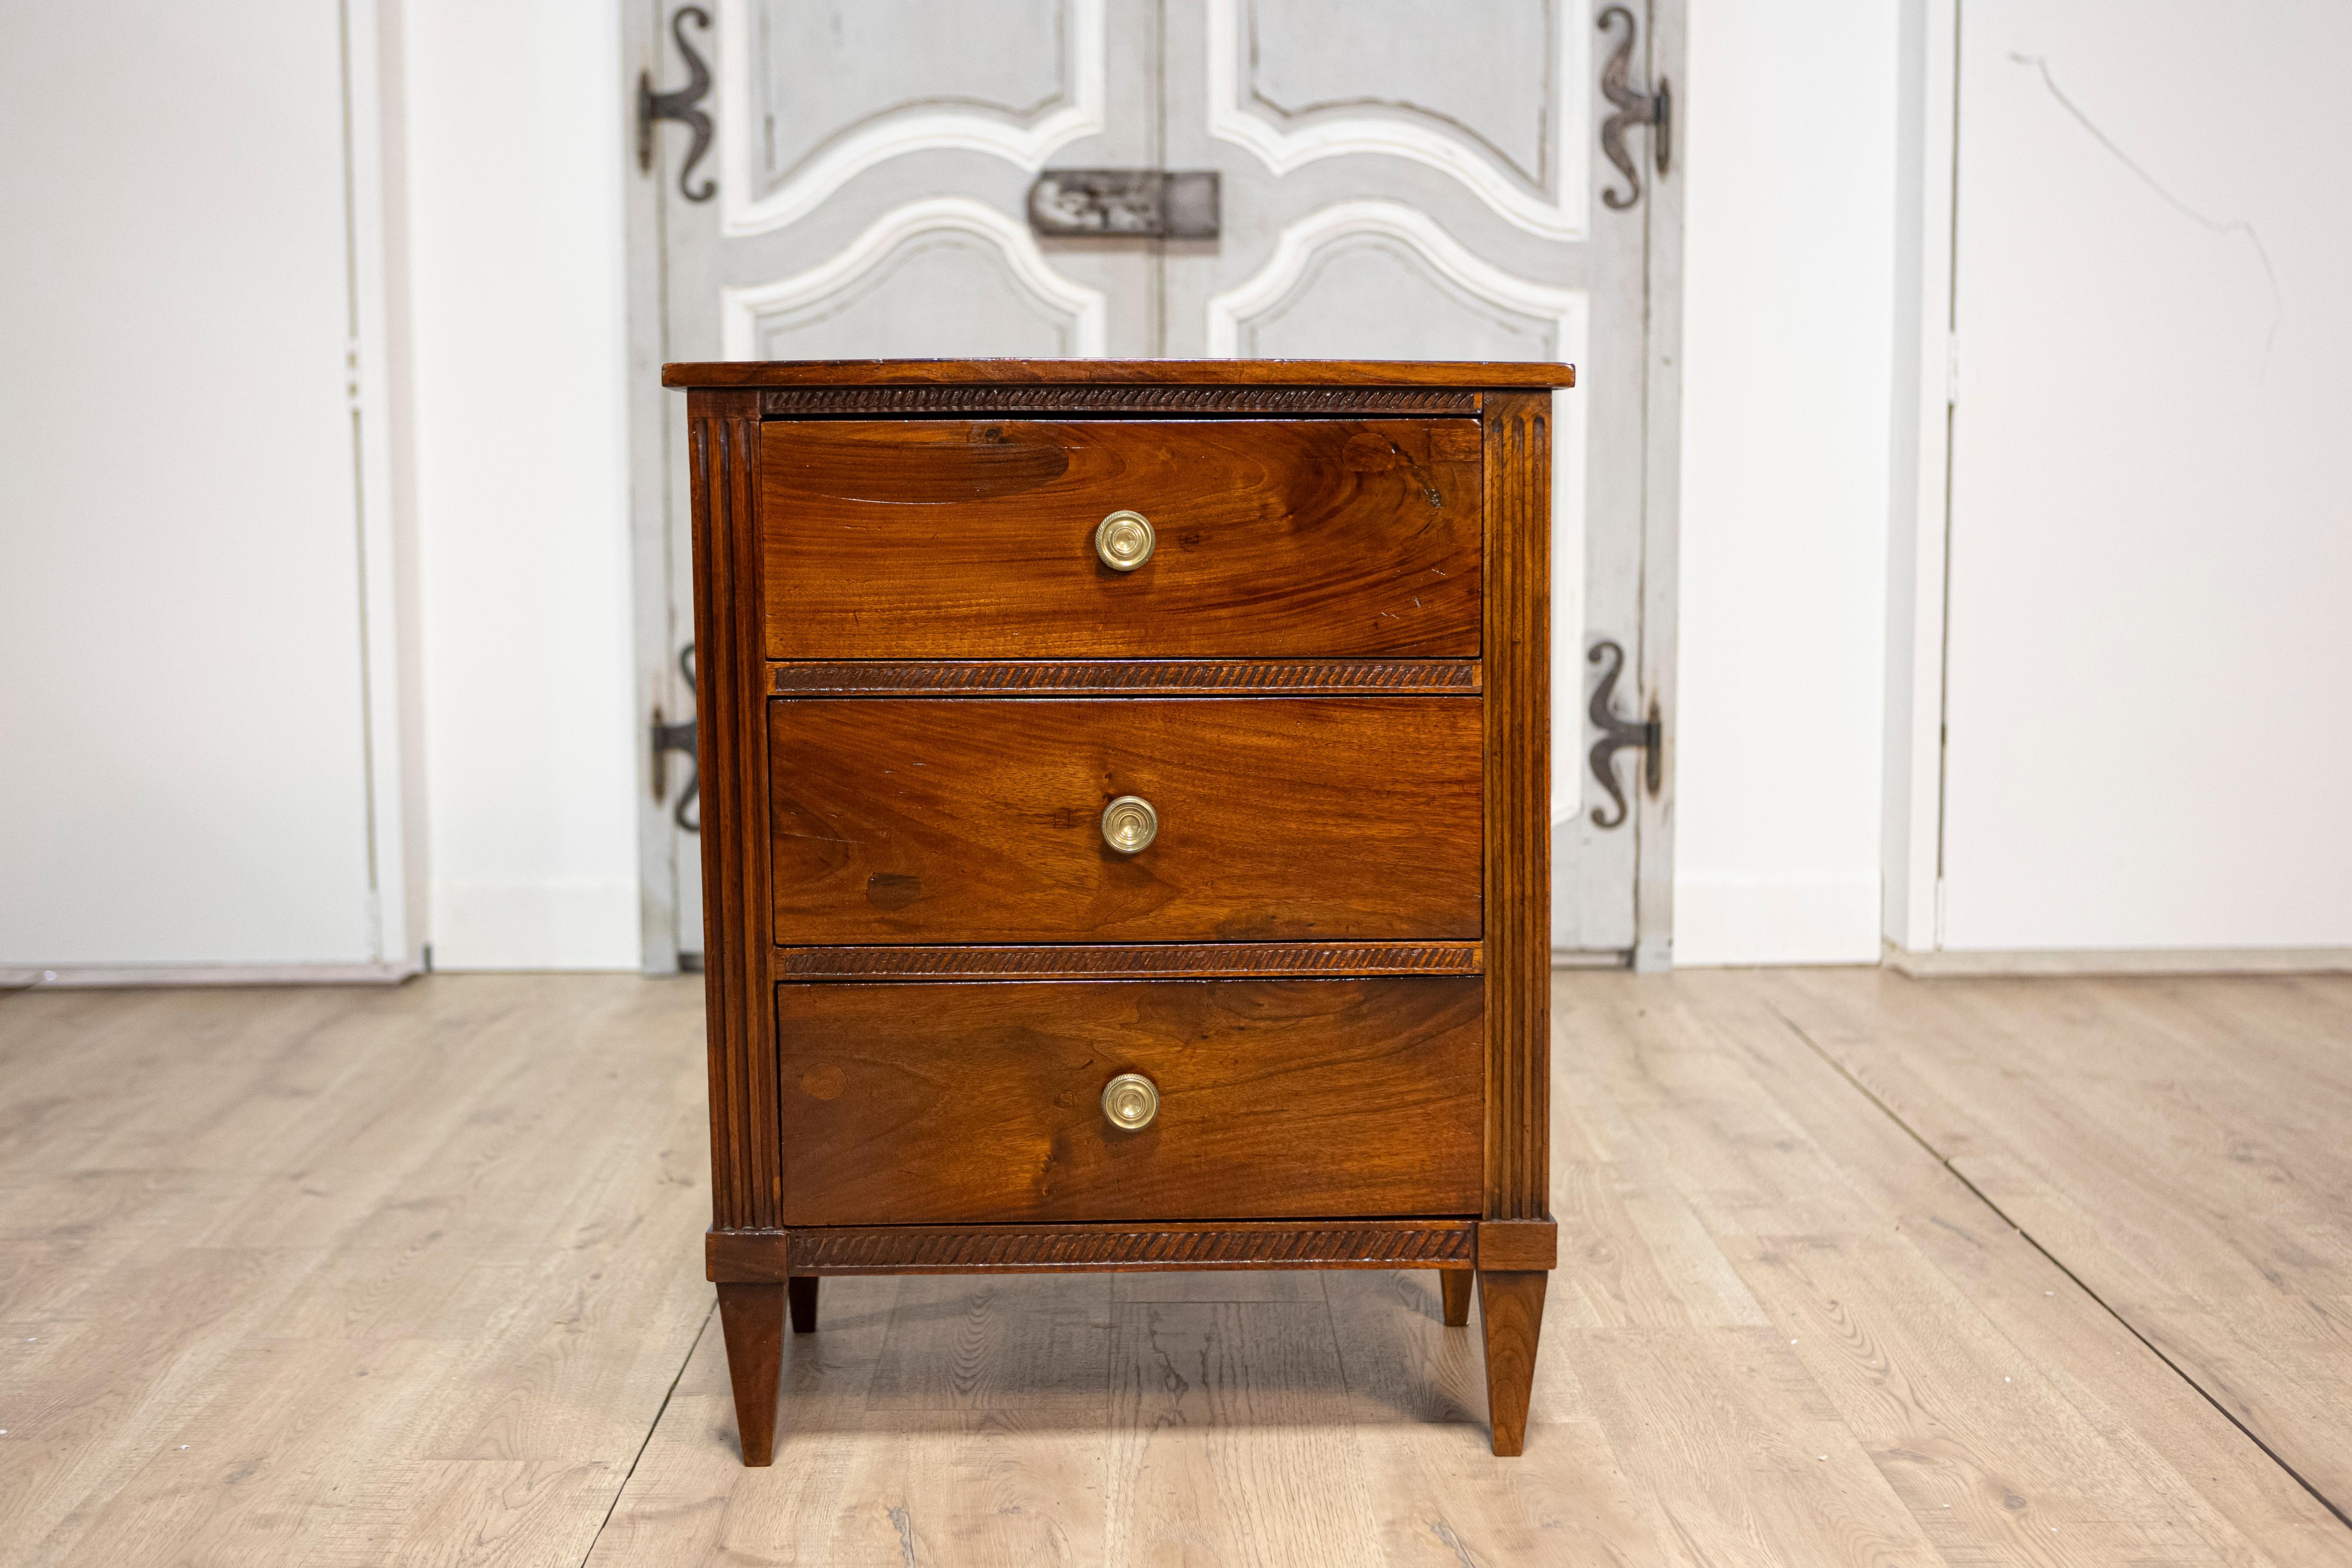 Carved Italian Directoire Period Late 18th Century Three Drawer Walnut Bedside Chest For Sale